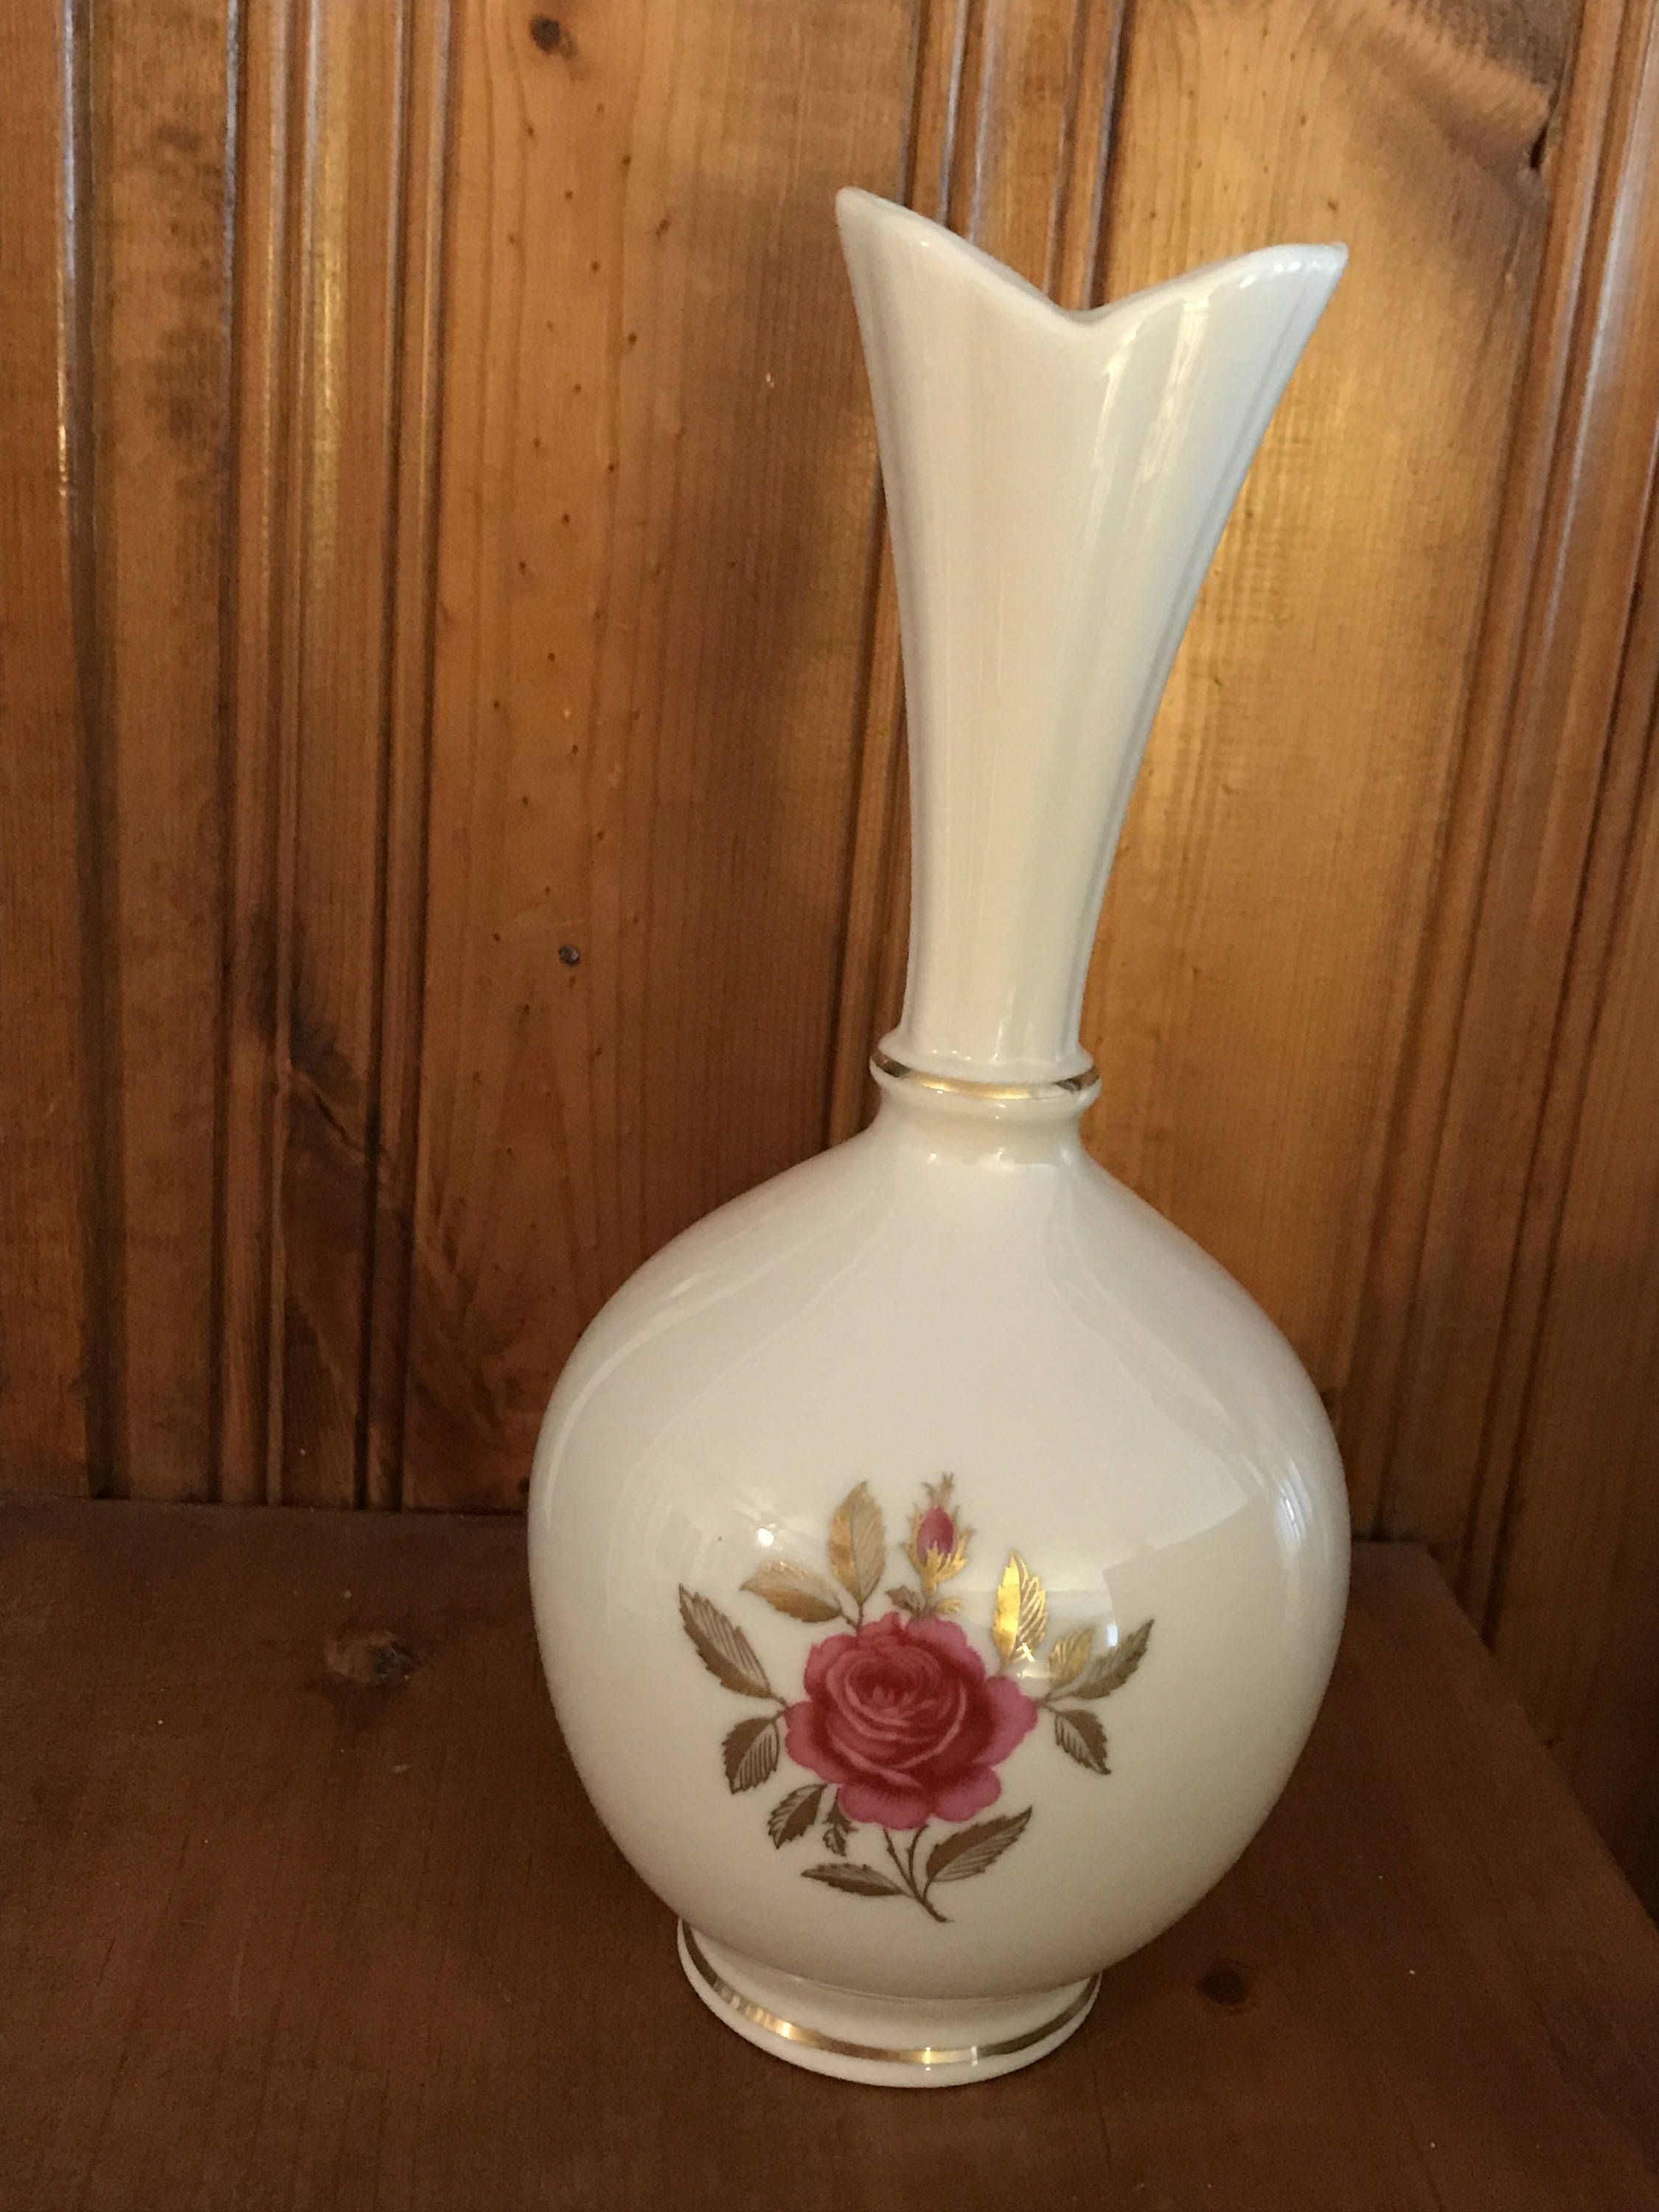 15 Lovable Vintage Lenox Vases 2023 free download vintage lenox vases of vintage lenox floral rose bud vase with 24kt gold trim rose buds with regard to vintage lenox floral rose bud vase with 24kt gold trim by thecountrycowshed on etsy